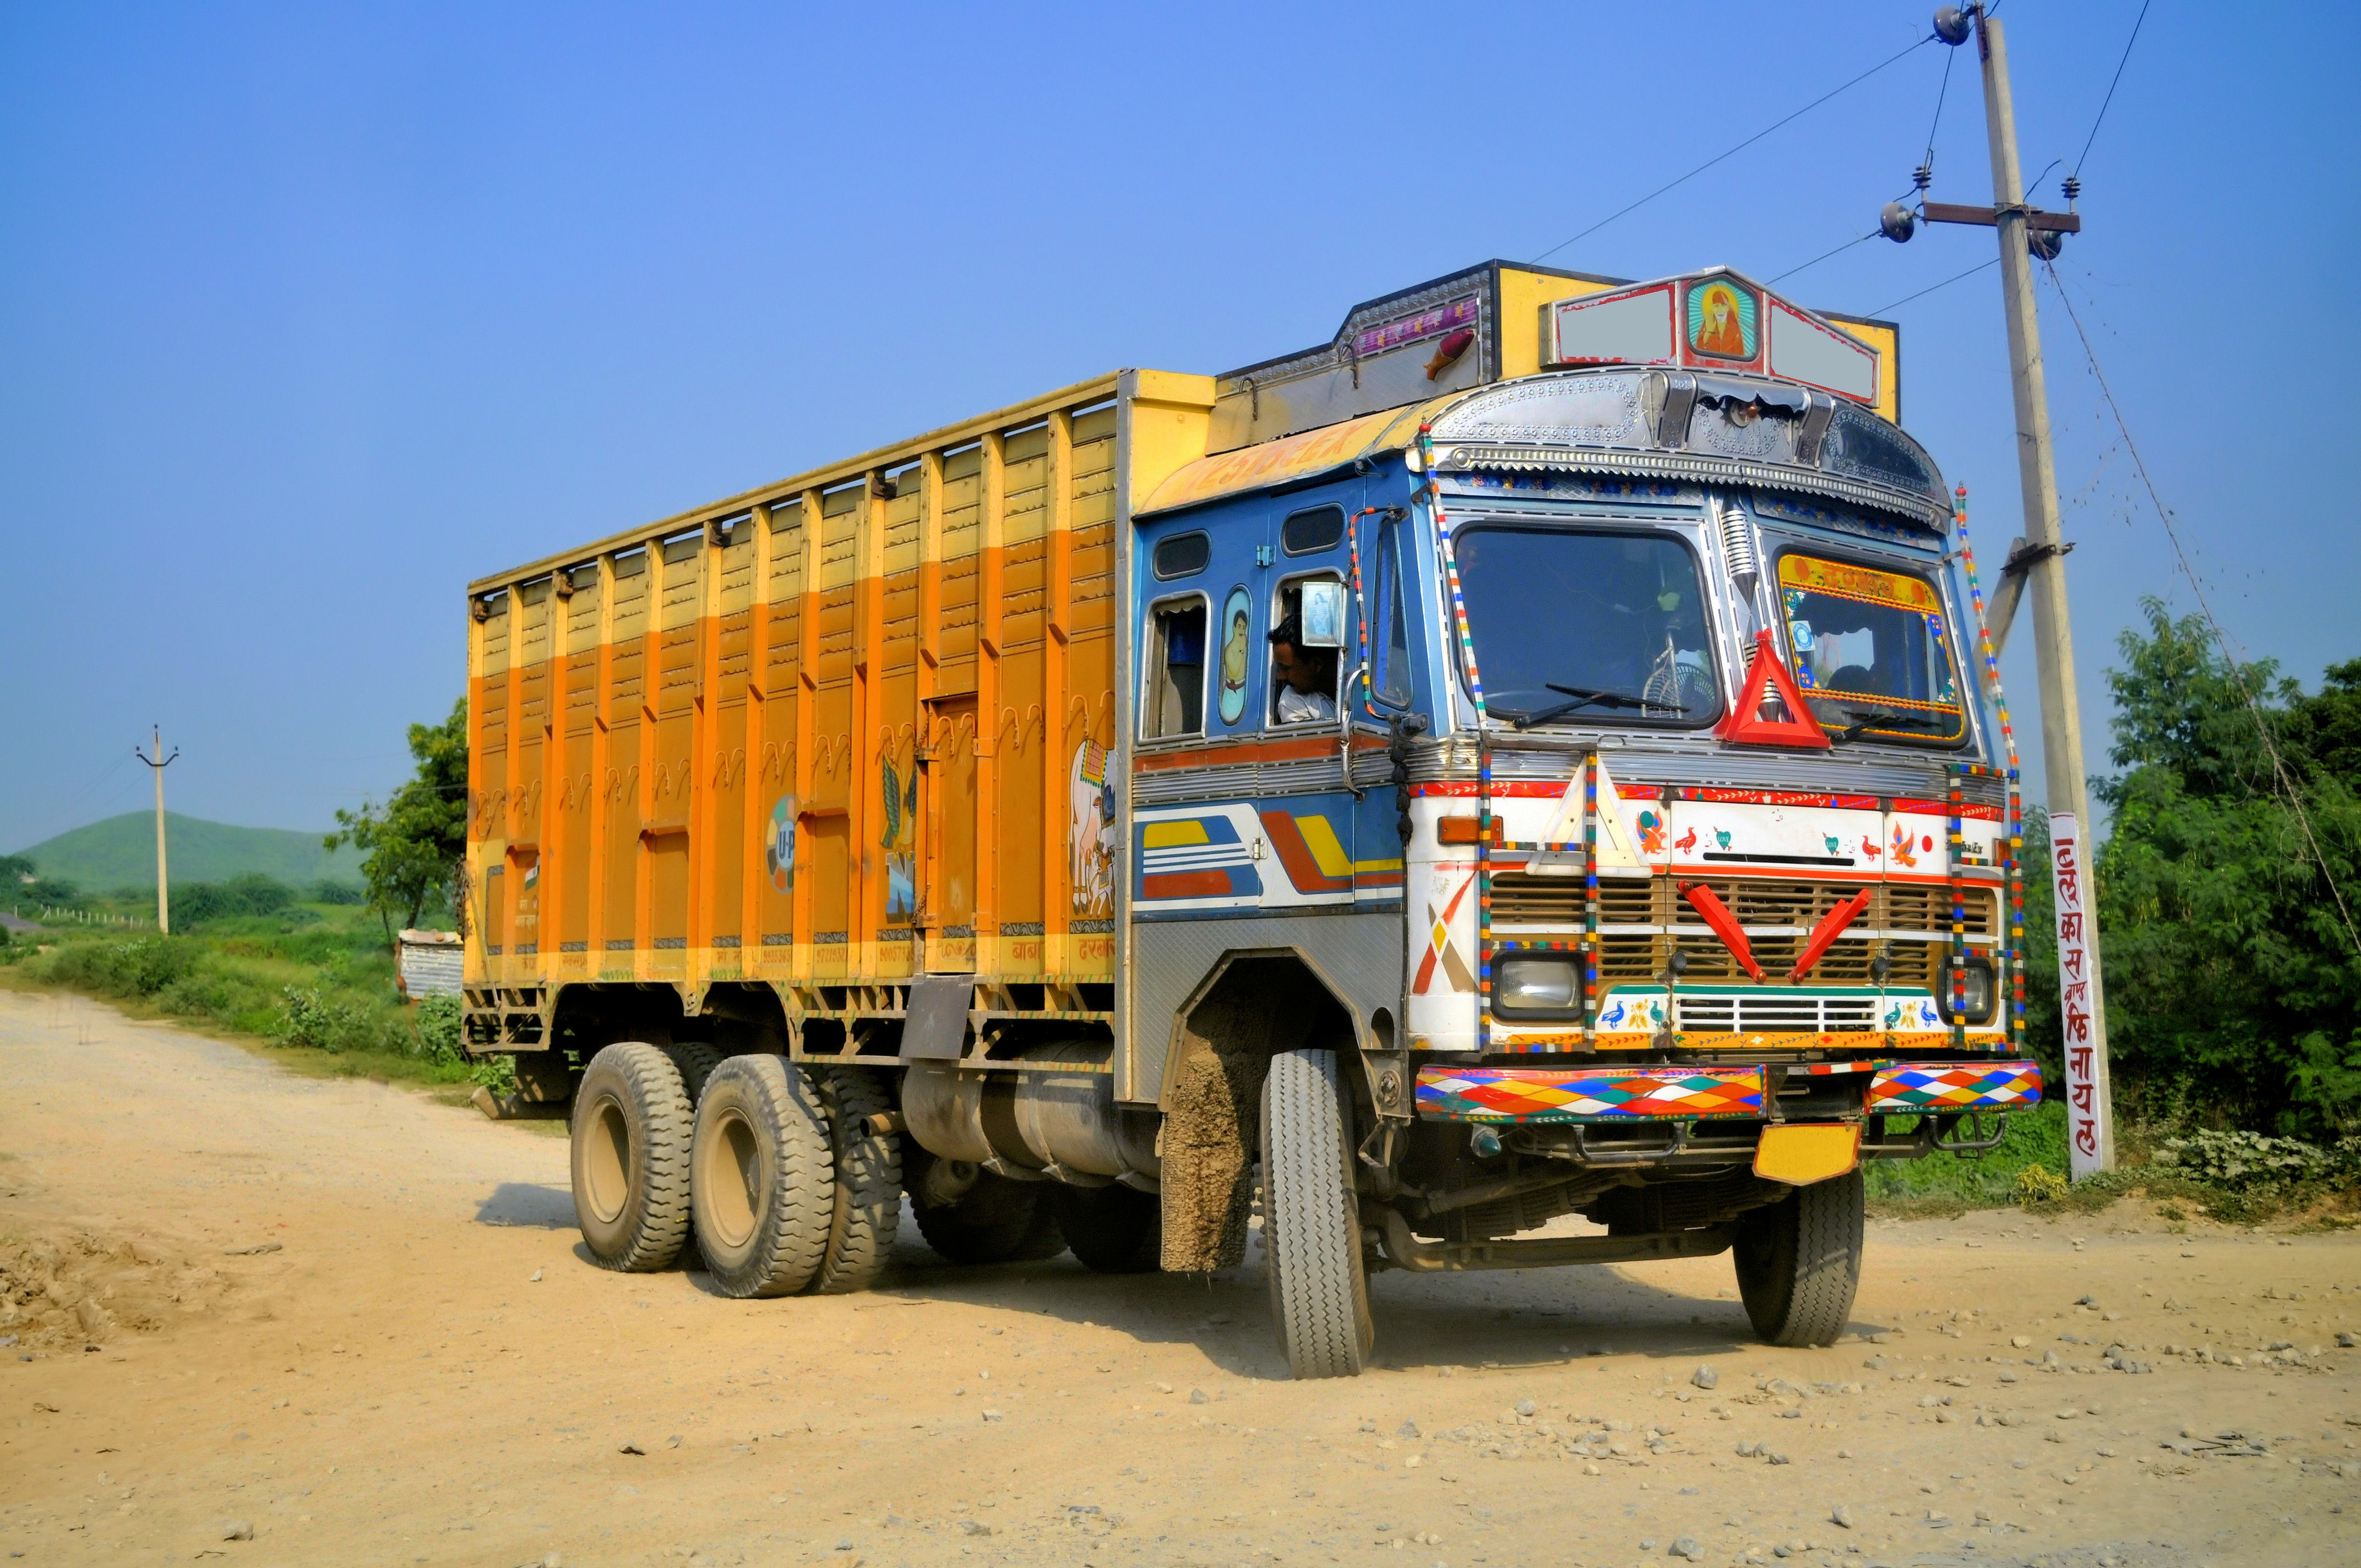 Truck, a commercial vehicle in India.